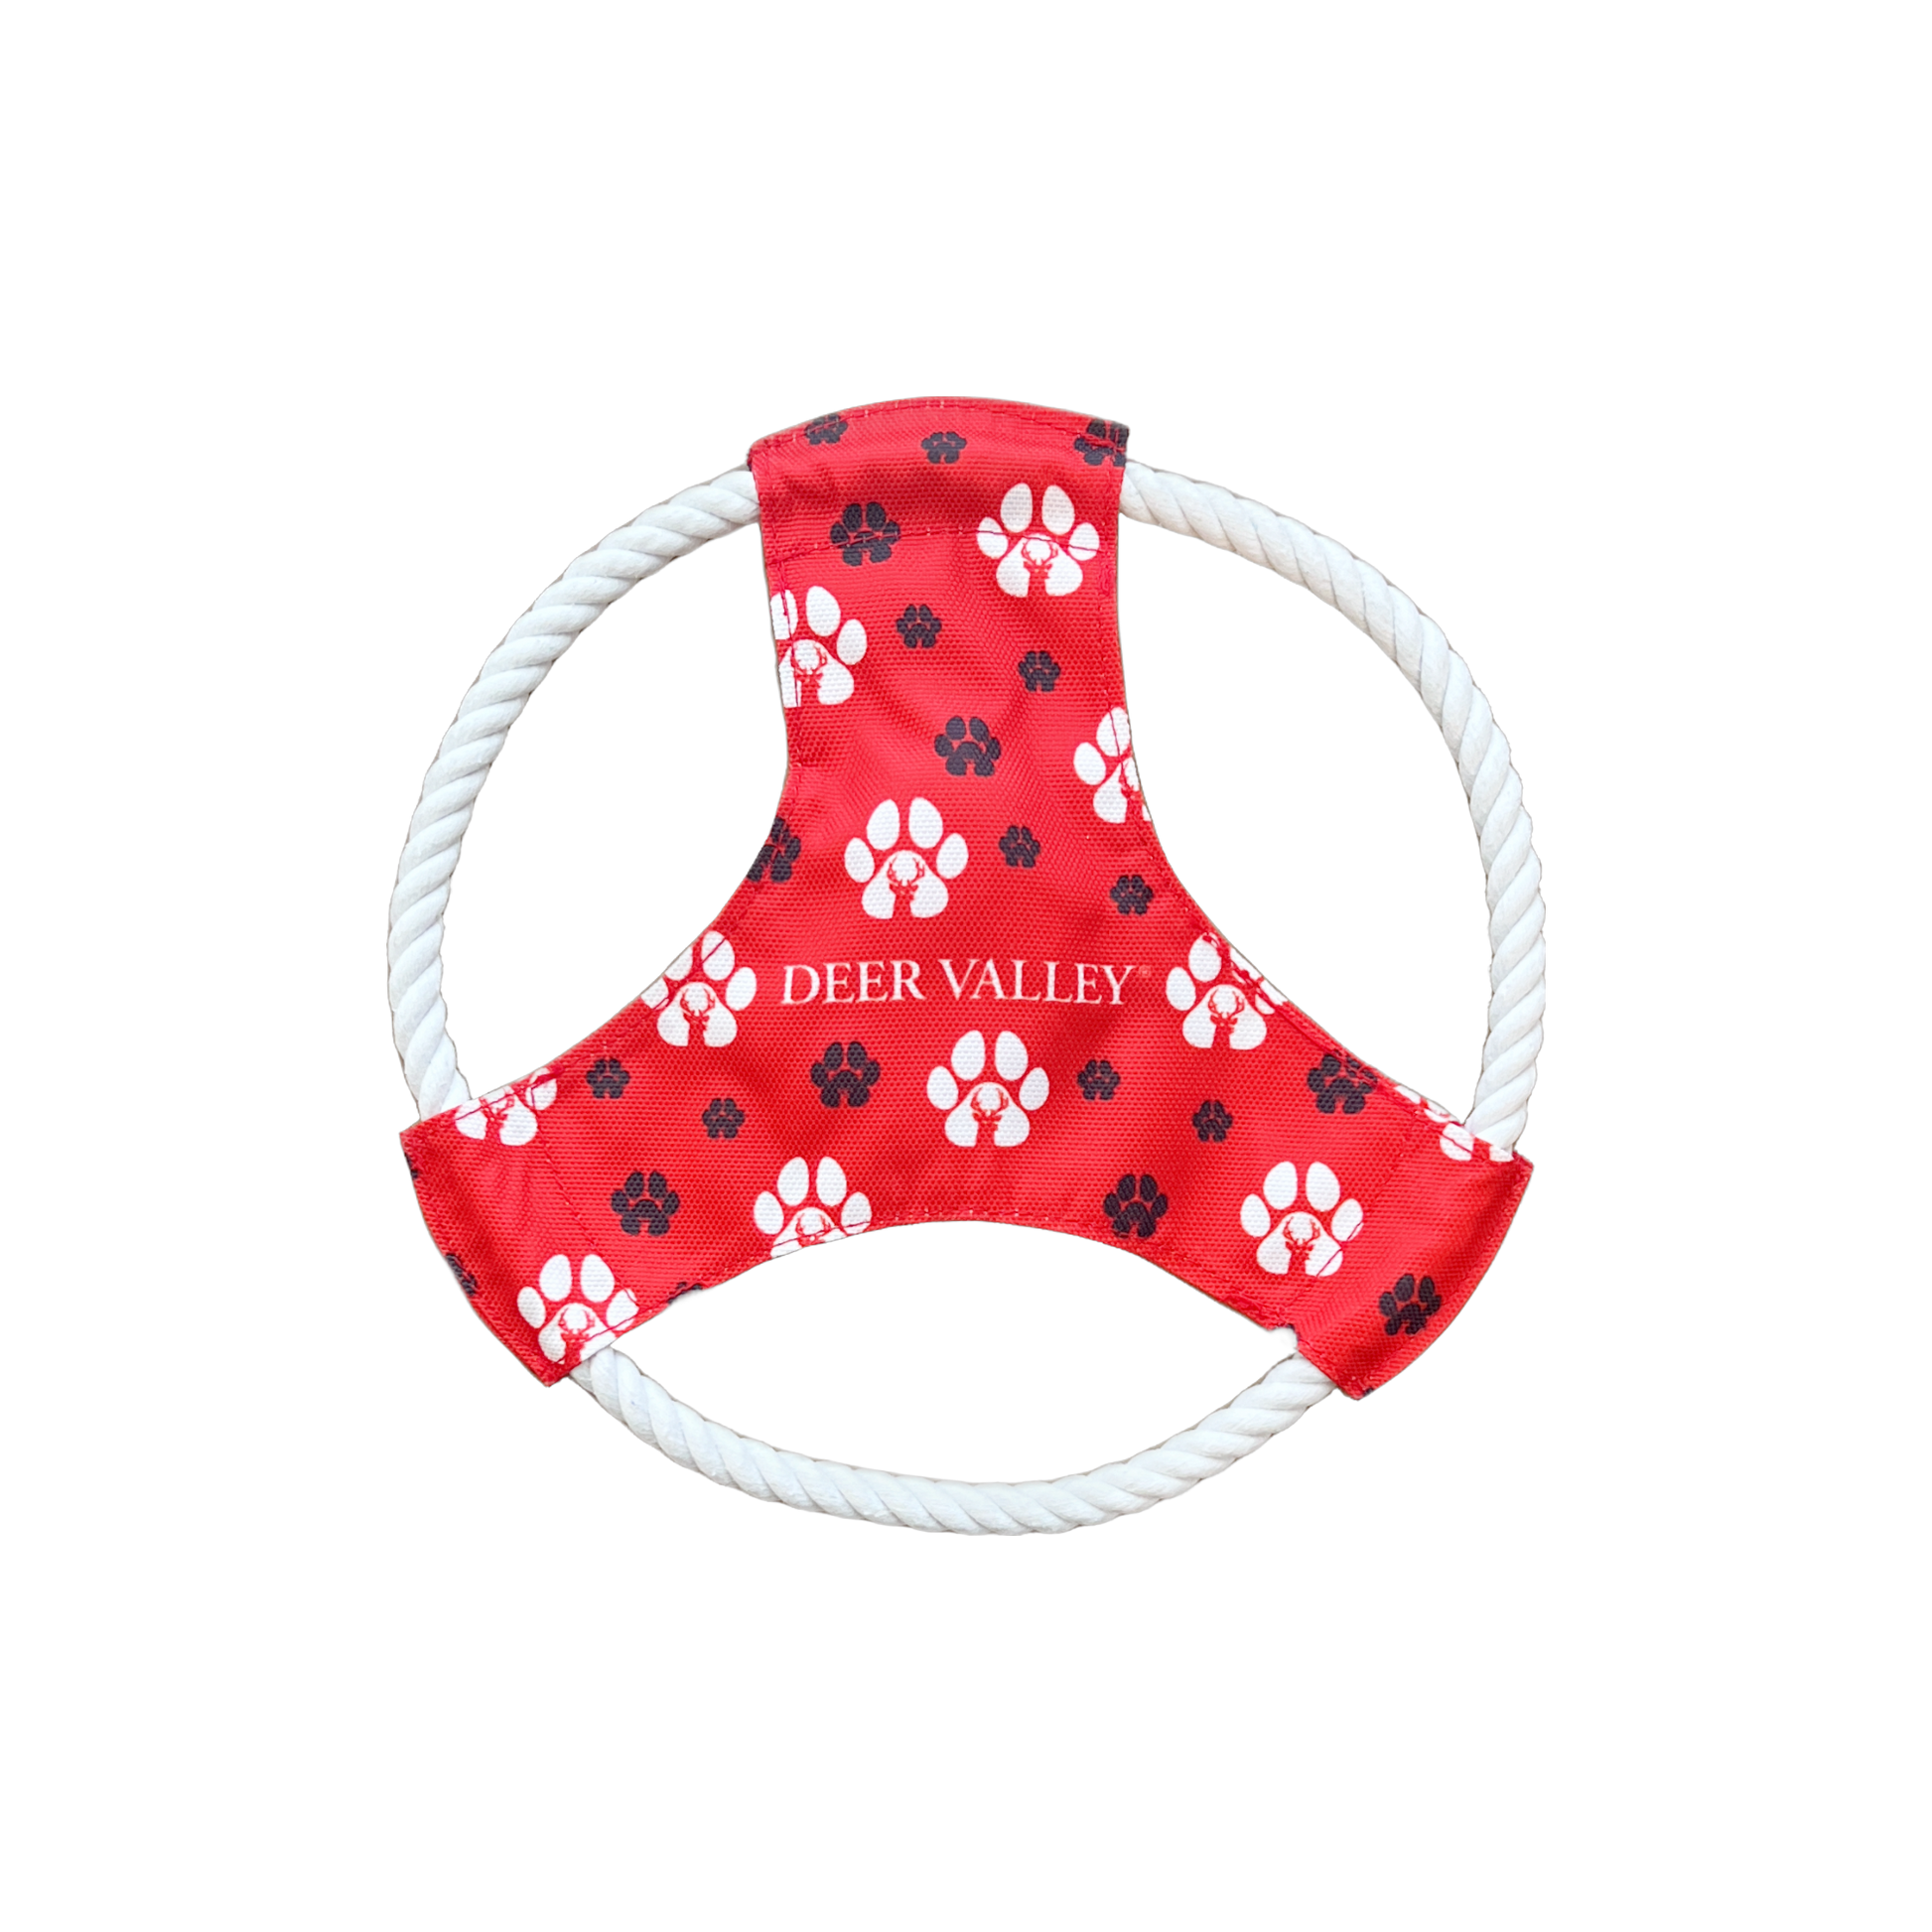 red and white dog paw throwable rope toy with deer valley logo